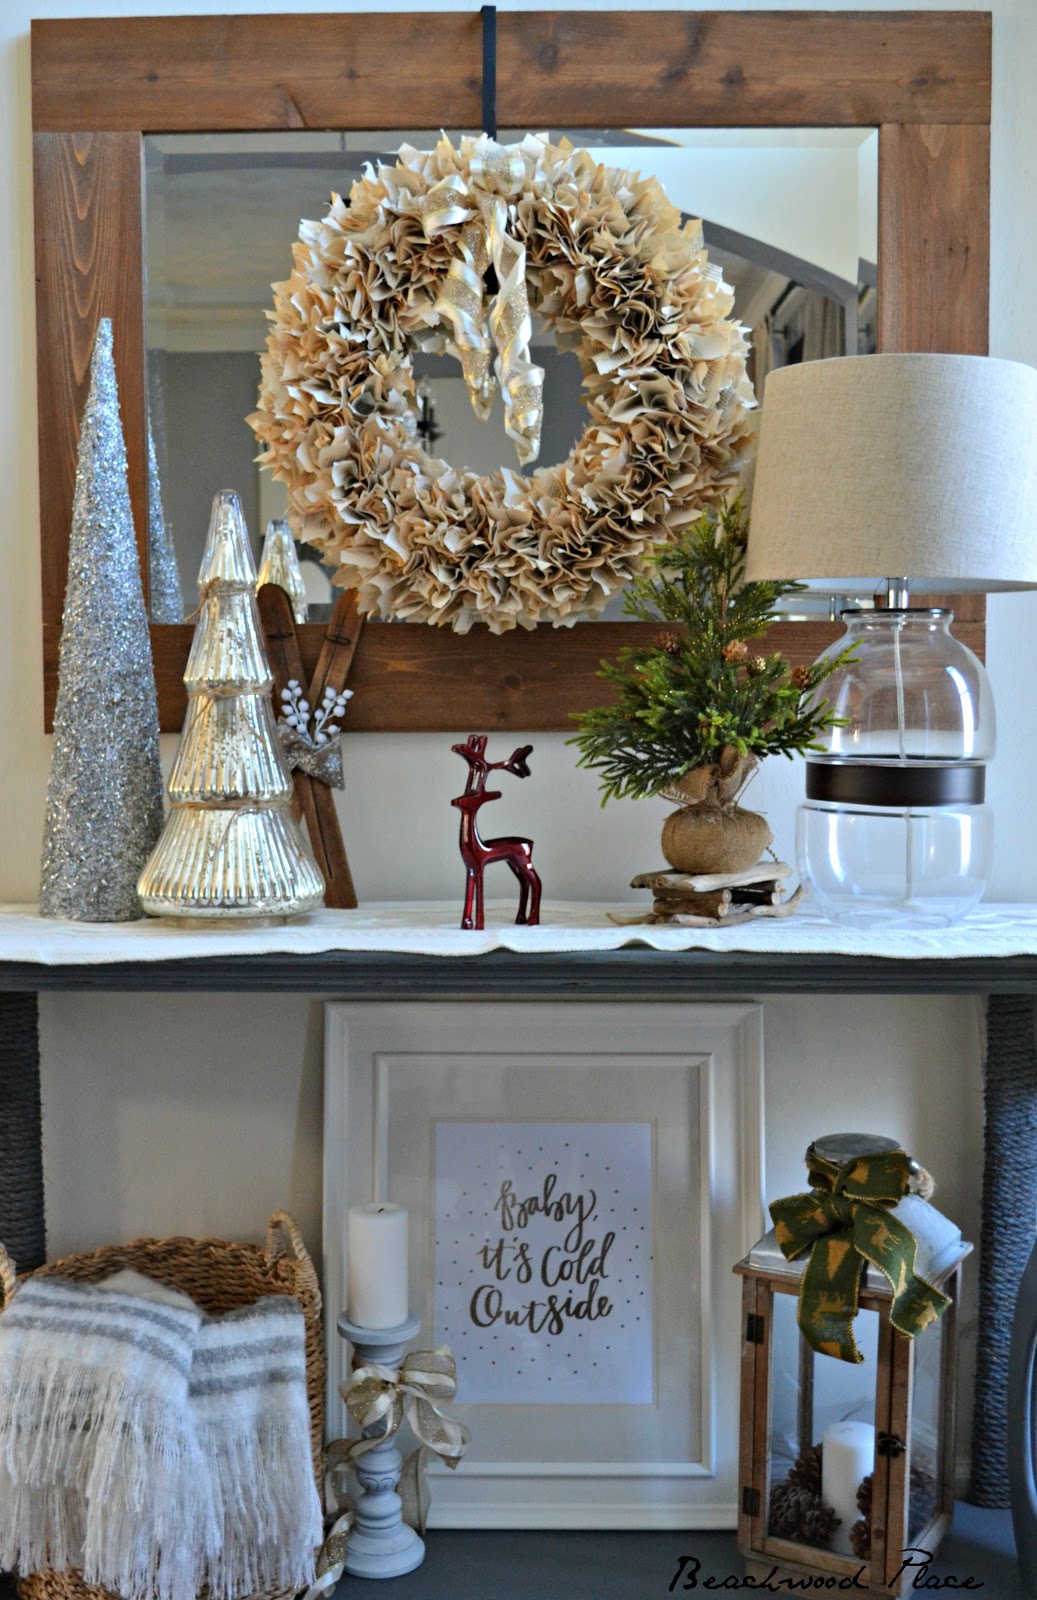 Beachwood Place: Christmas Book Page Wreath